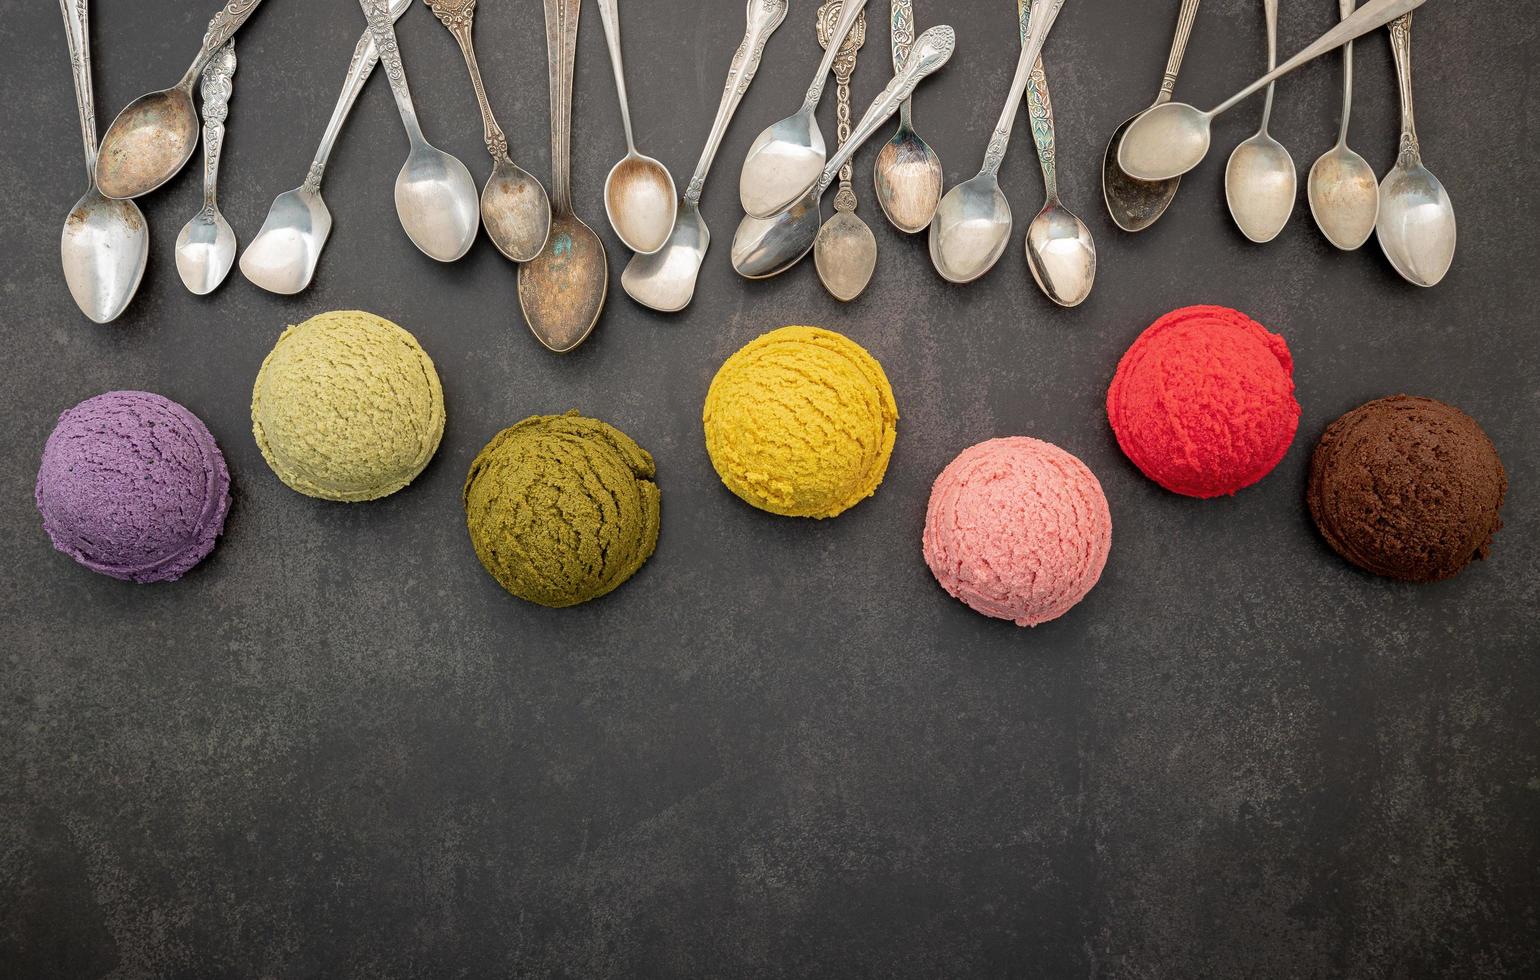 Spoons and ice cream scoops colorful photo